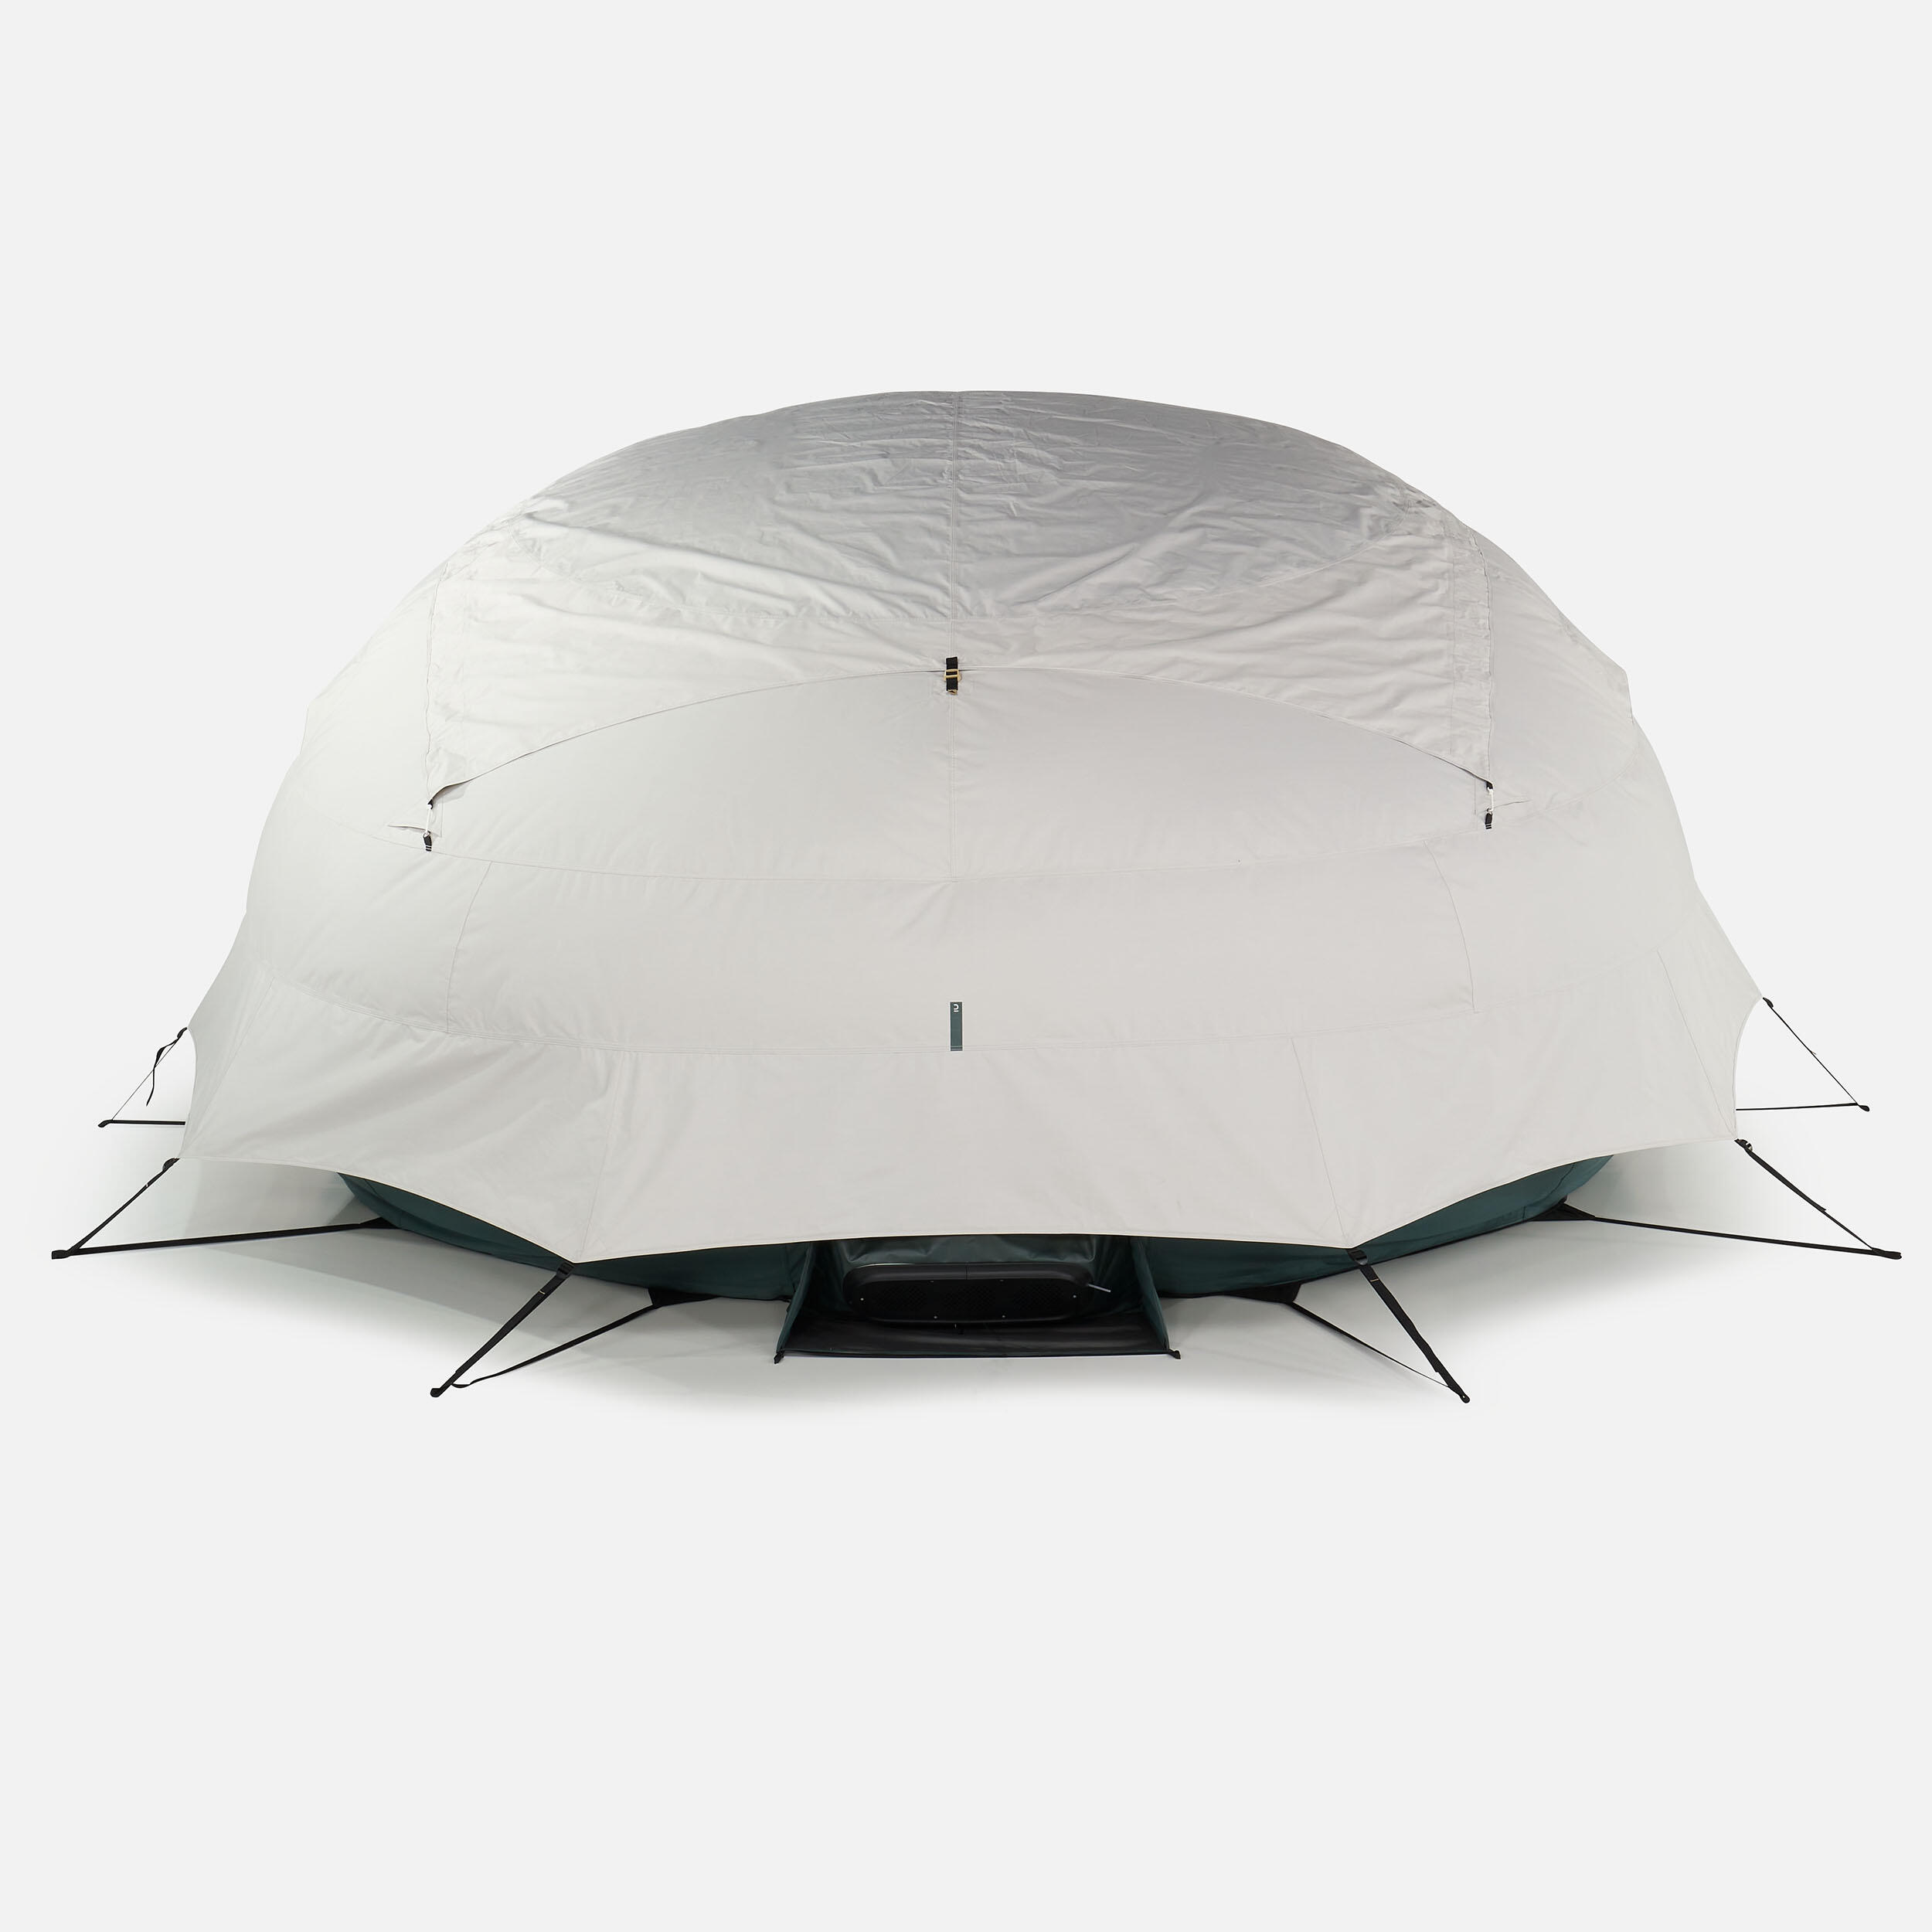 Camping Bubble Tent - AirSeconds Skyview Polycotton - 2 man - 1 Bedroom 11/23